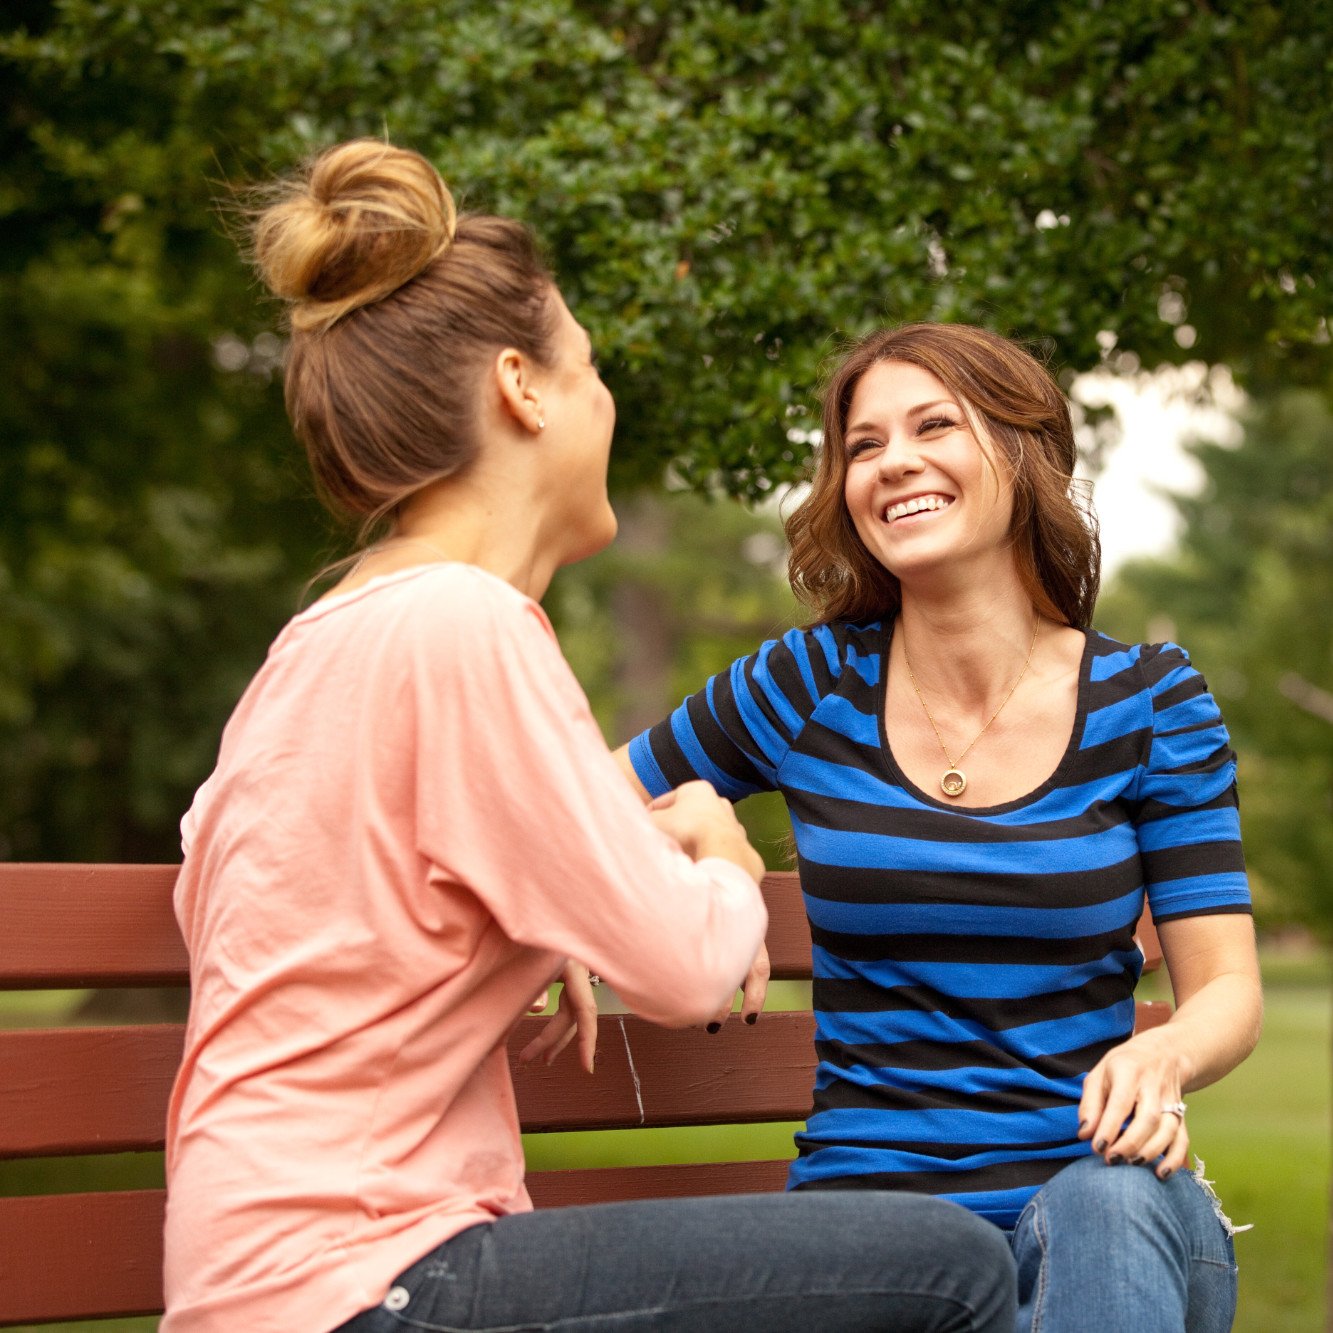 Two girls chatting on park bench